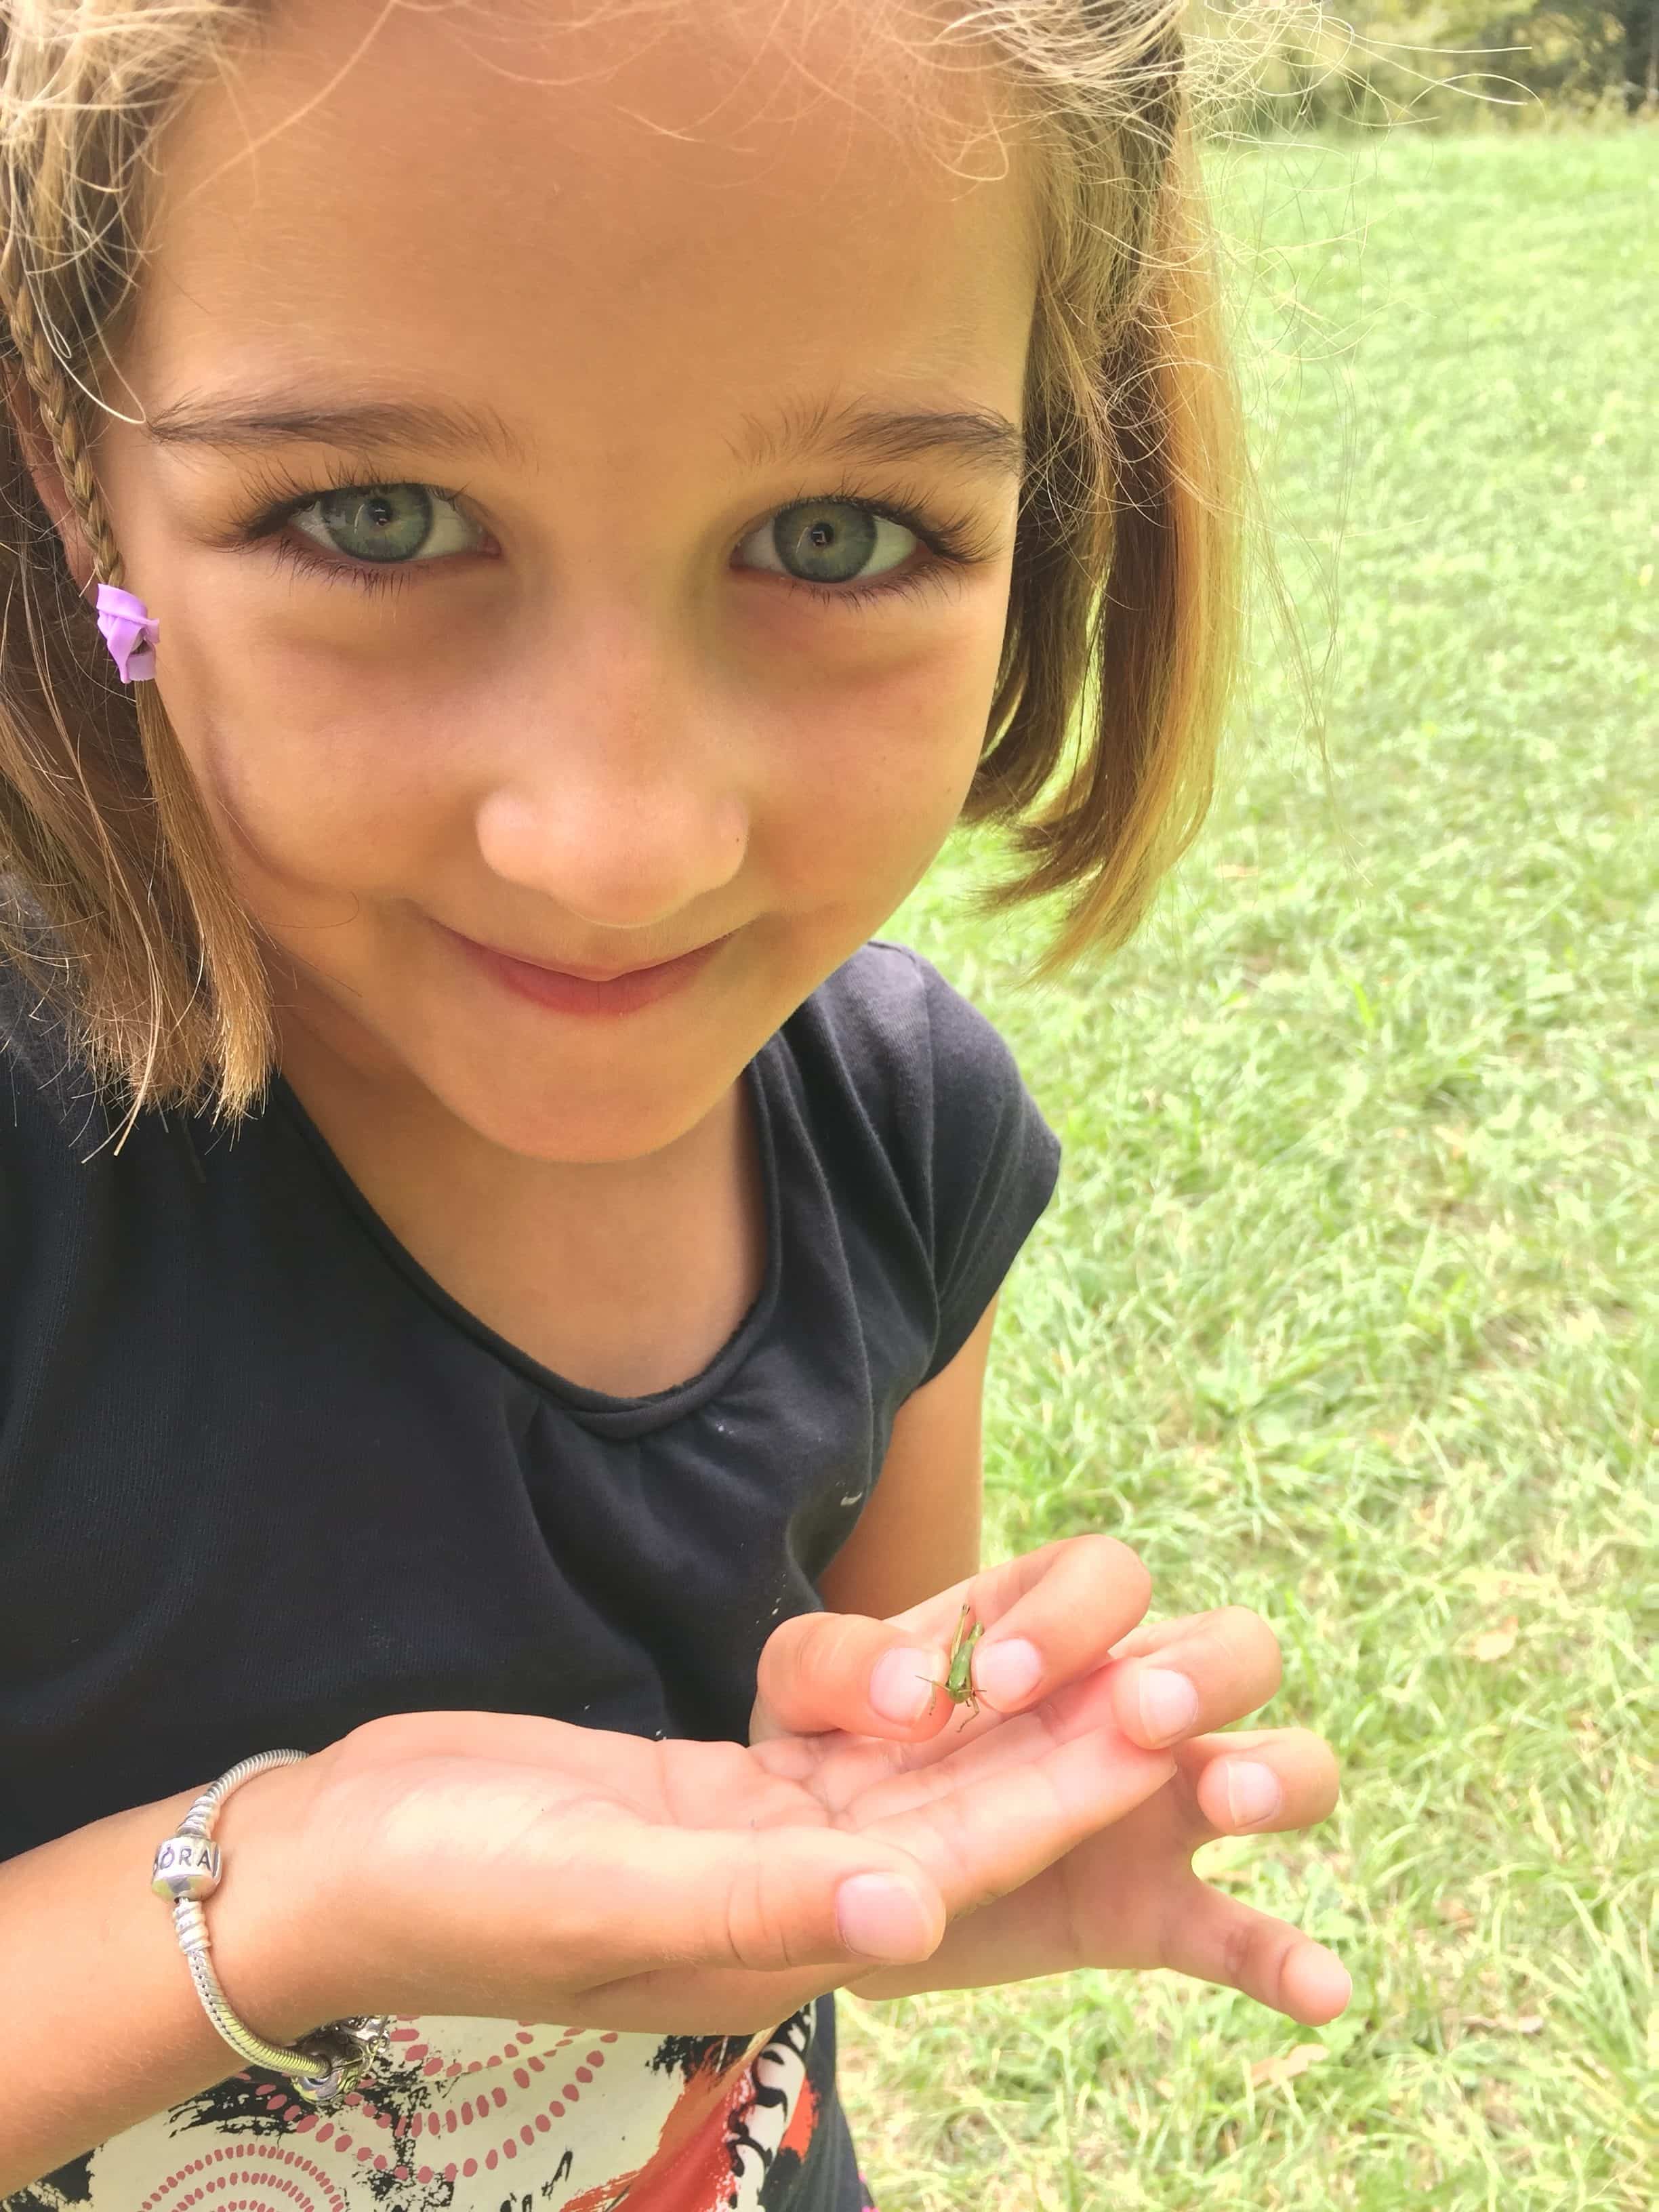 Vivi loves to catch grasshoppers! Who knew!